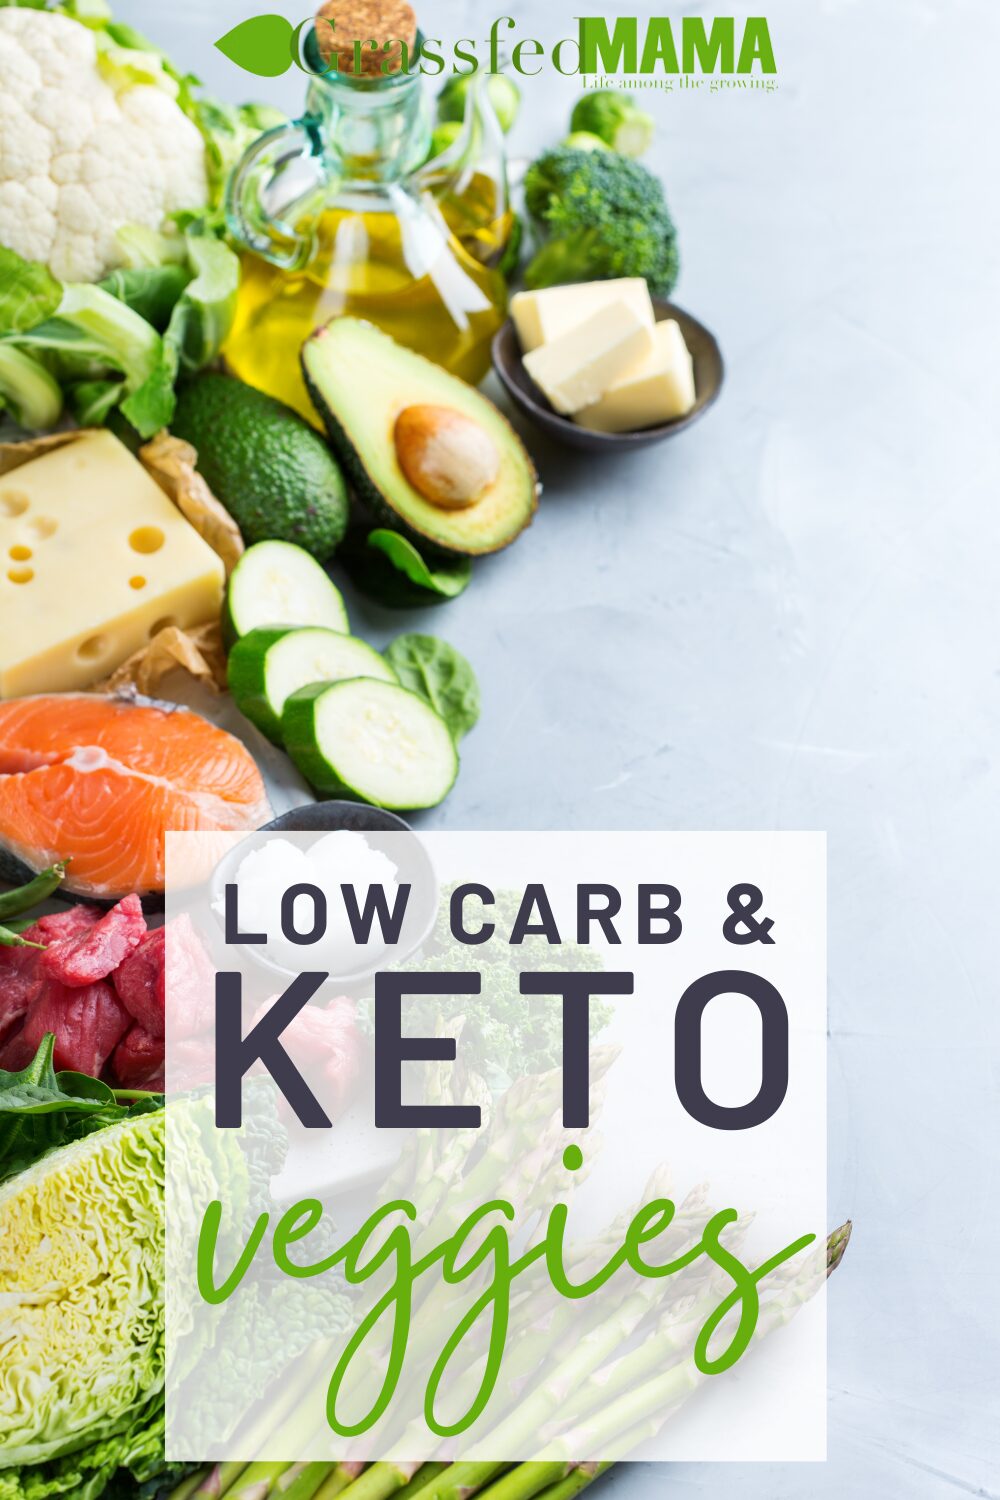 What Low Carb Vegetables are Keto Friendly